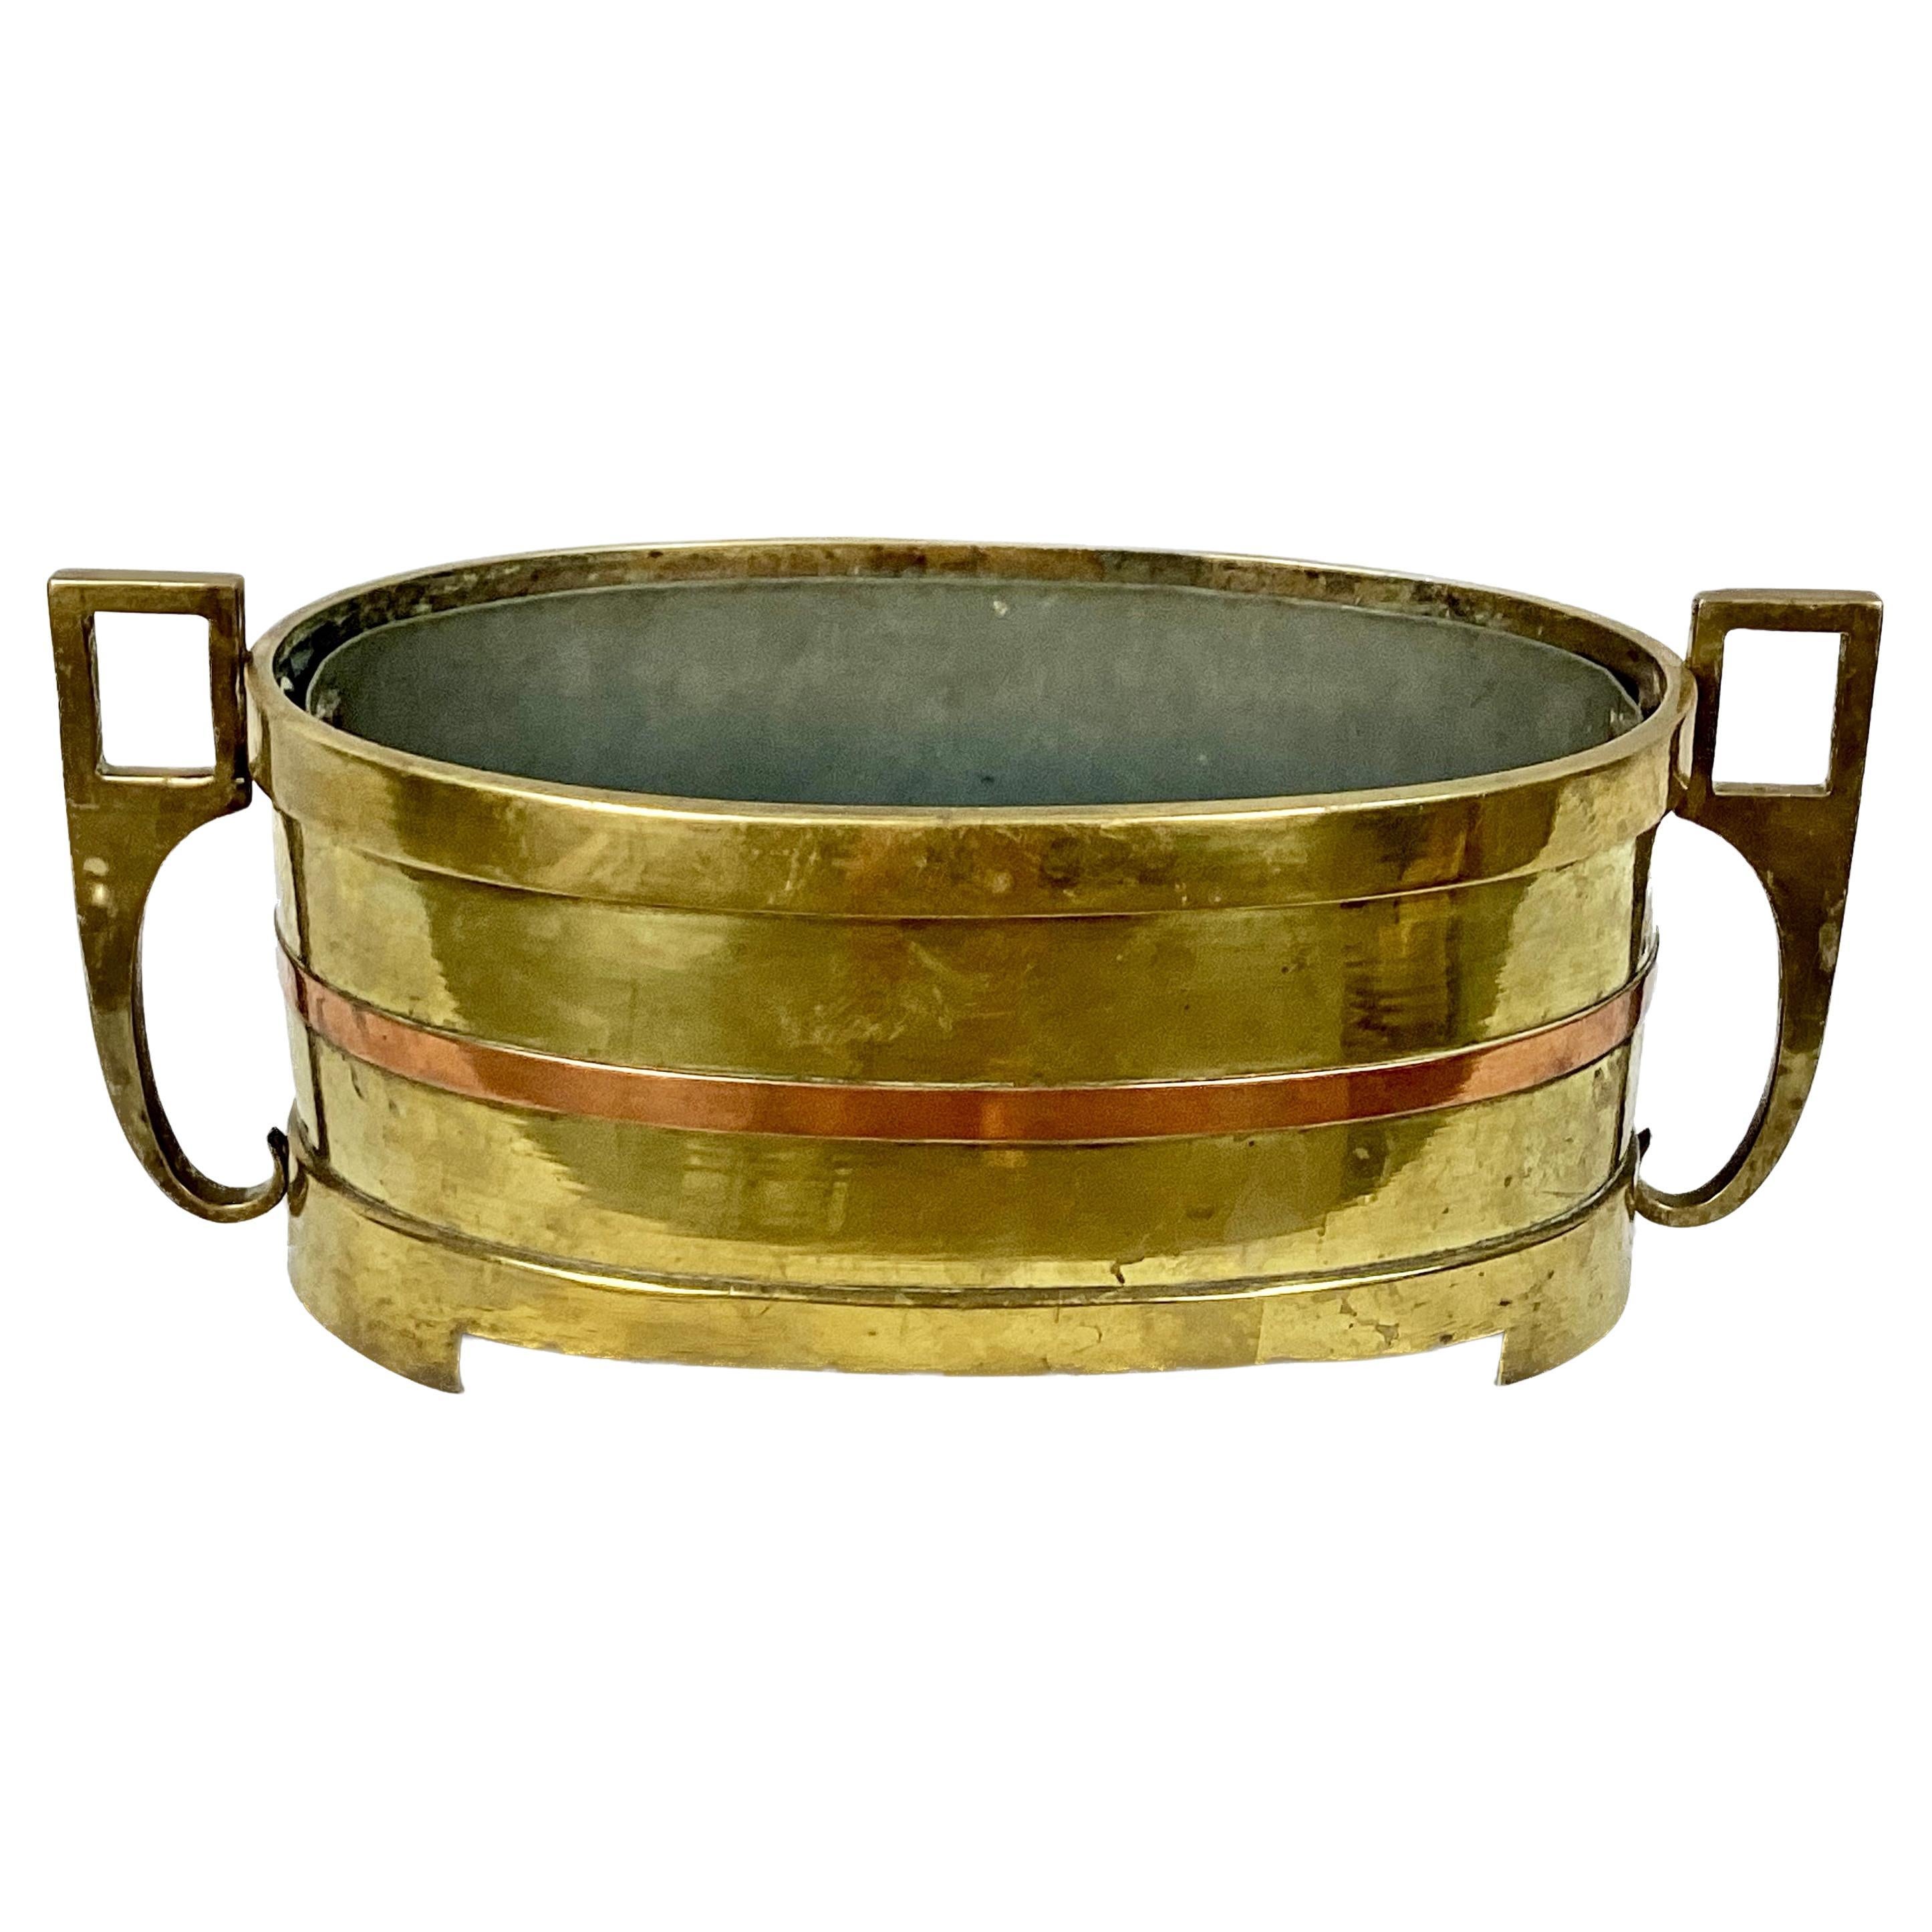 18th/19th Century Oval Brass And Copper Planter With Liner